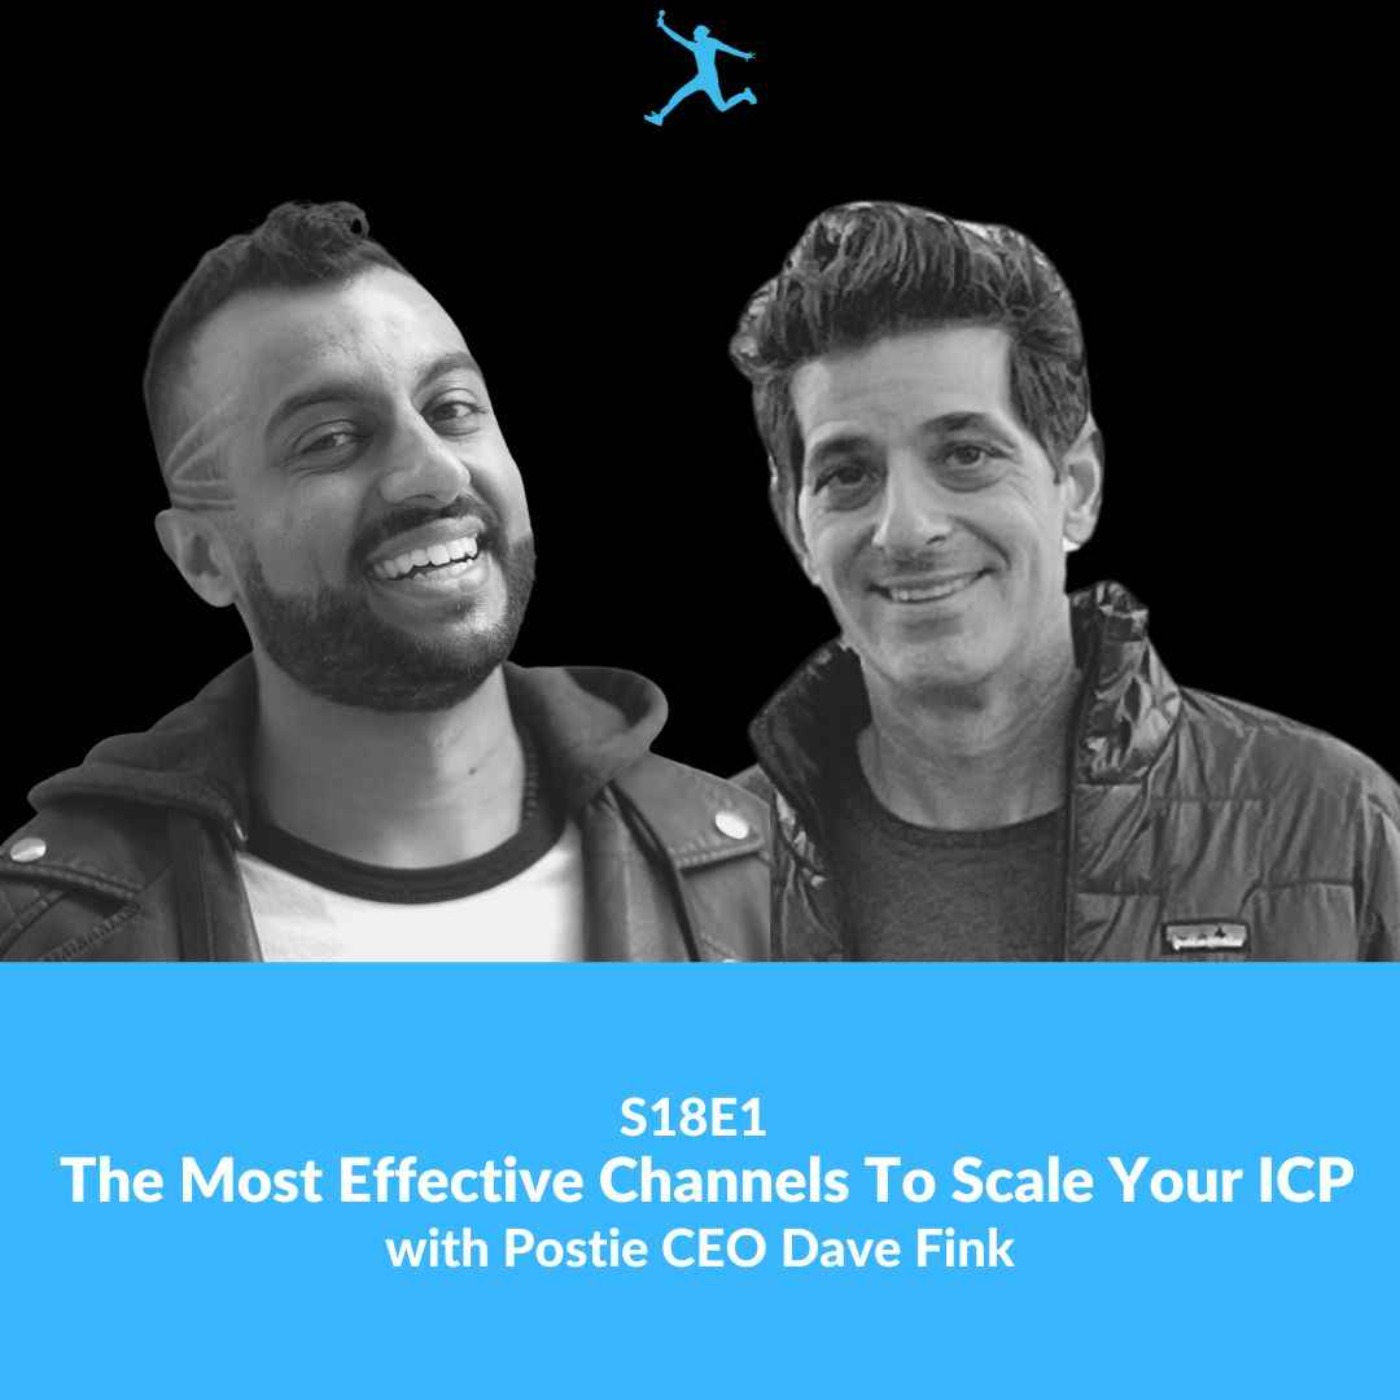 S18E1: The Most Effective Channels To Scale Your ICP with Postie CEO David Fink